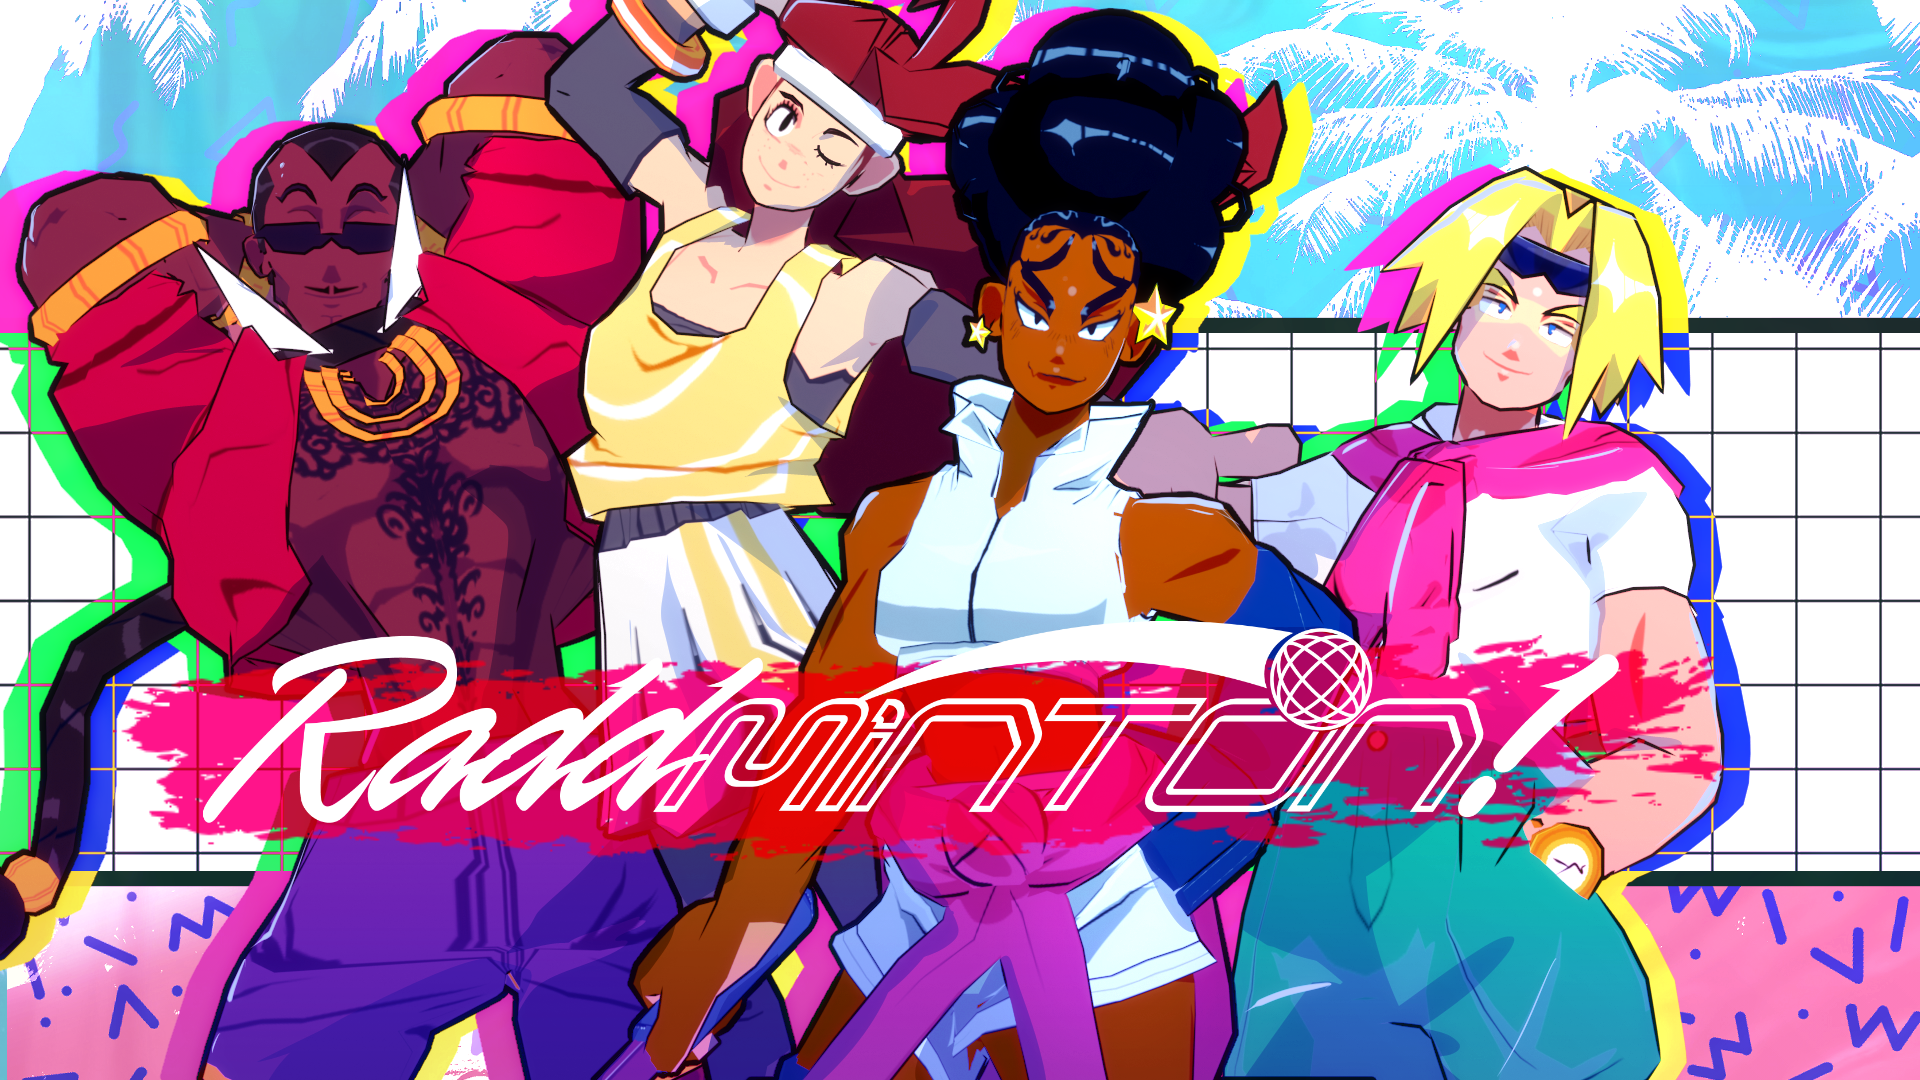 Jet Set Radio style meets badminton in this stylish sports game